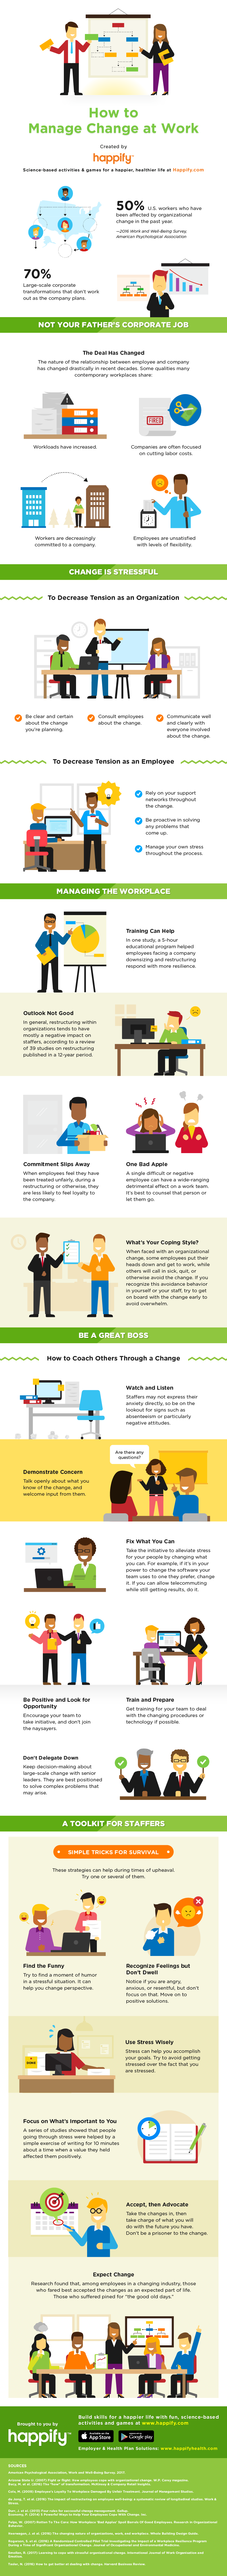 How to Manage Change in the Workplace - #infographic